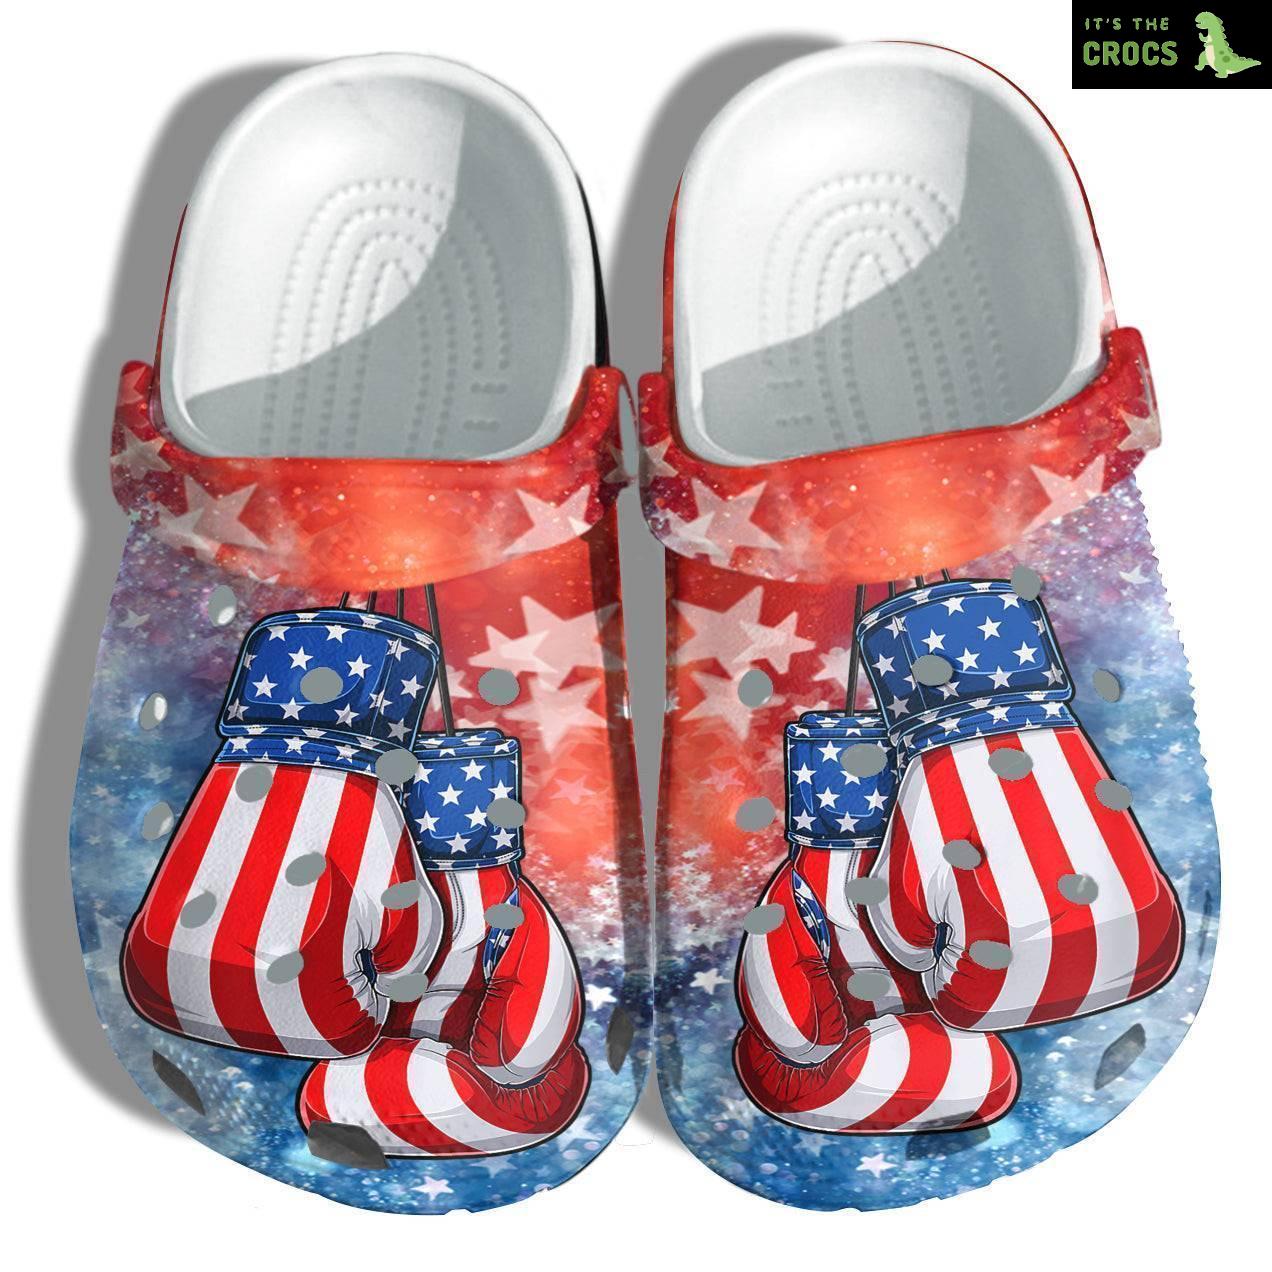 Boxing Fighter Breast Cancer America Flag Crocs Clog Shoes Gift Women – Usa Pugilism Soldiers Veterans 4Th Of July Crocs Clog Shoes Birthday Gift